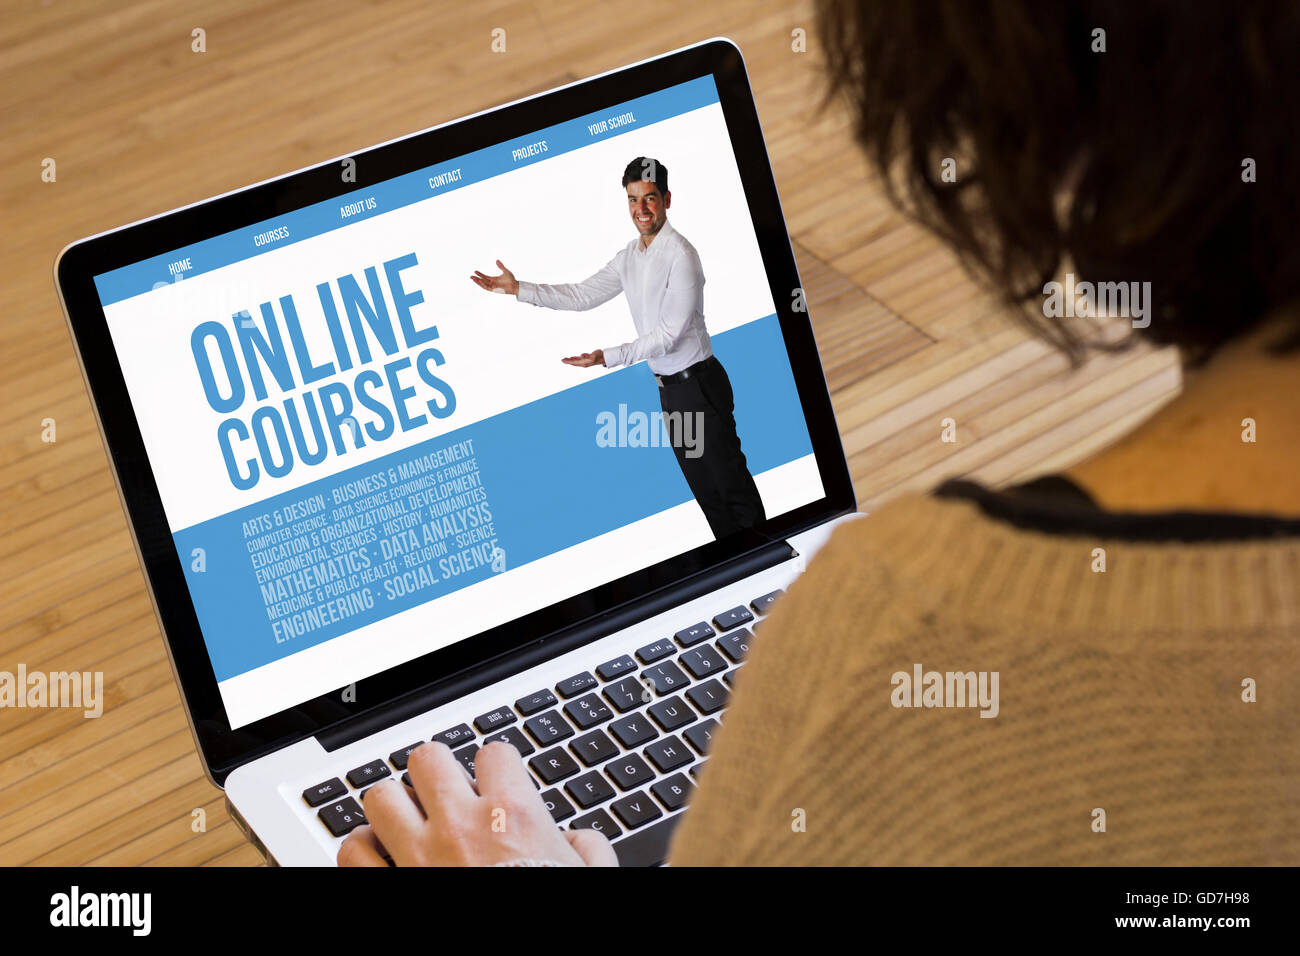 courses online concept: marketing online on a laptop screen. Screen graphics are made up. Stock Photo